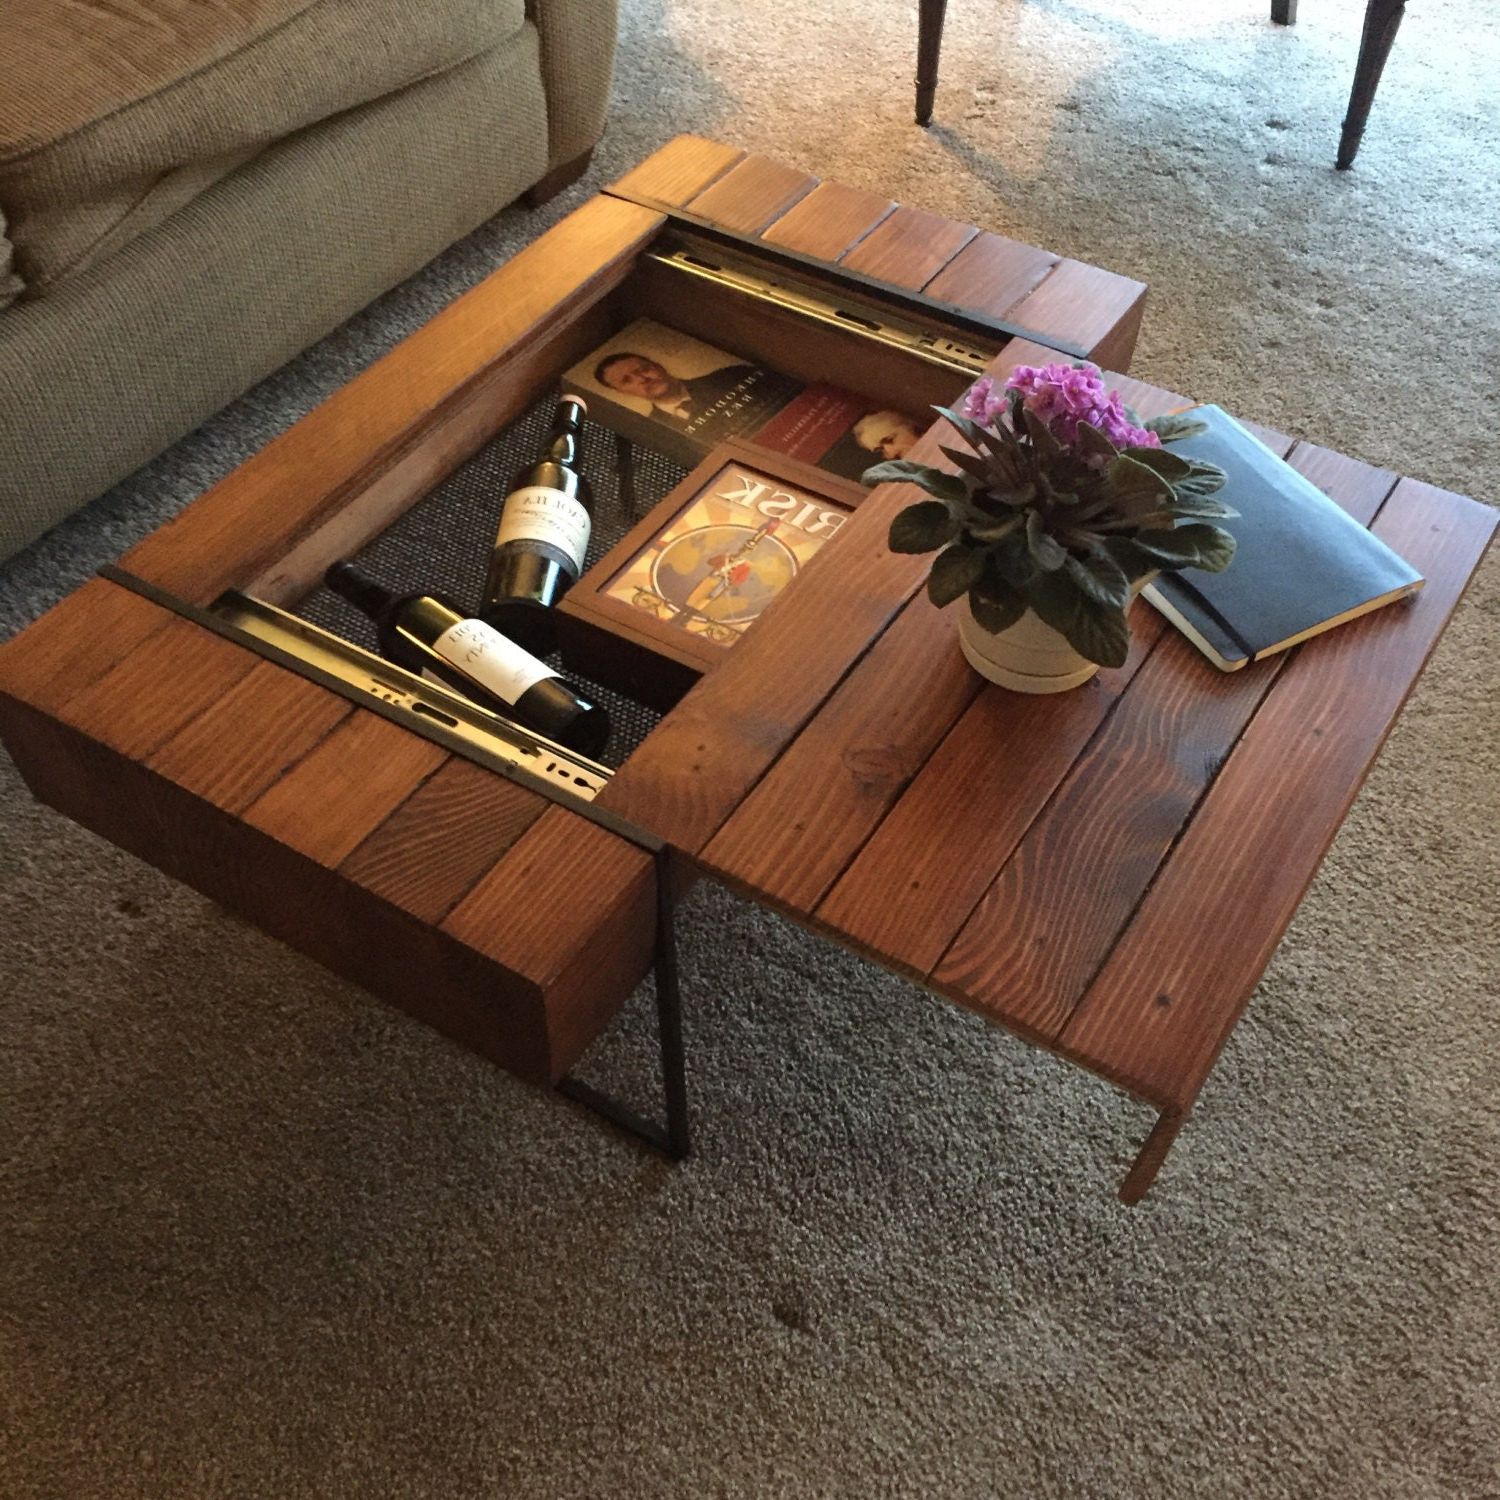 Block Coffee Table With Hidden Storage Pertaining To Modern Coffee Tables With Hidden Storage Compartments (View 7 of 20)